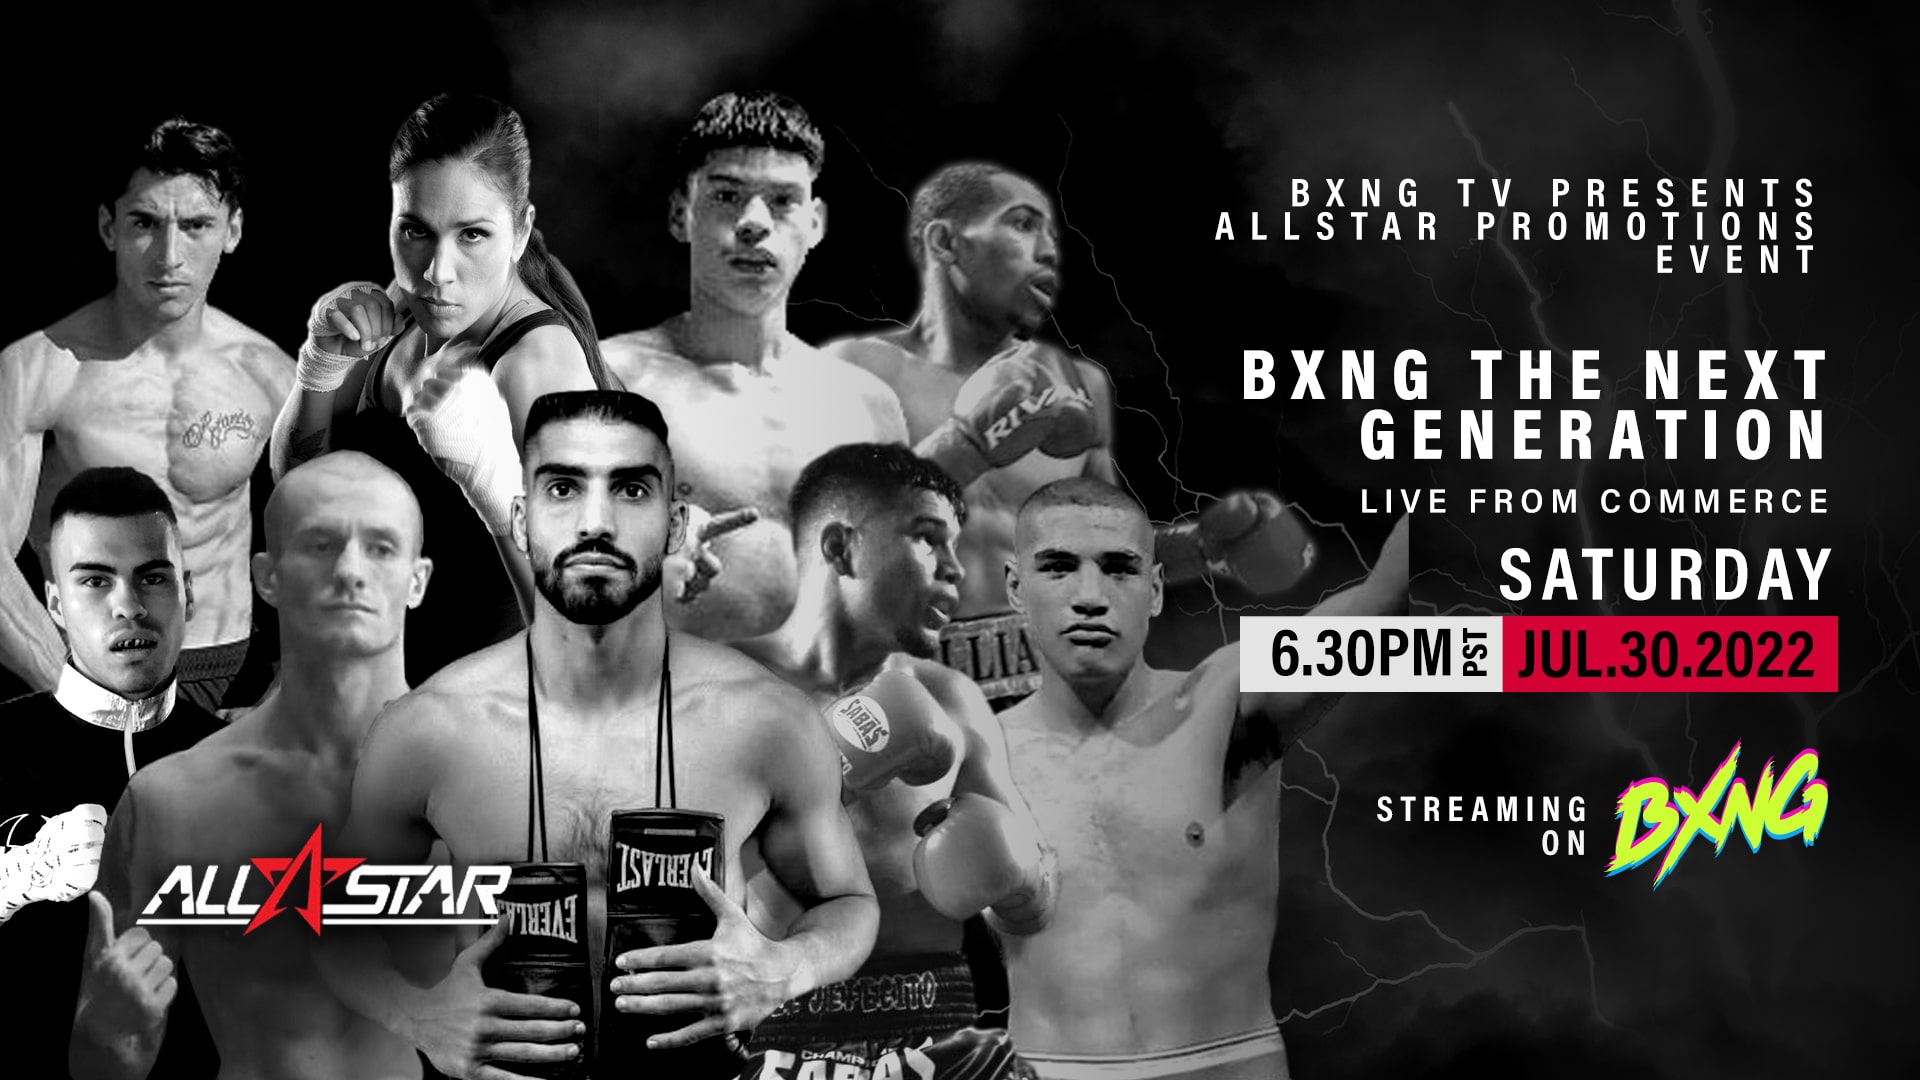 BXNG TV Presents Allstar Promotions Event Live Stream 07/30/22